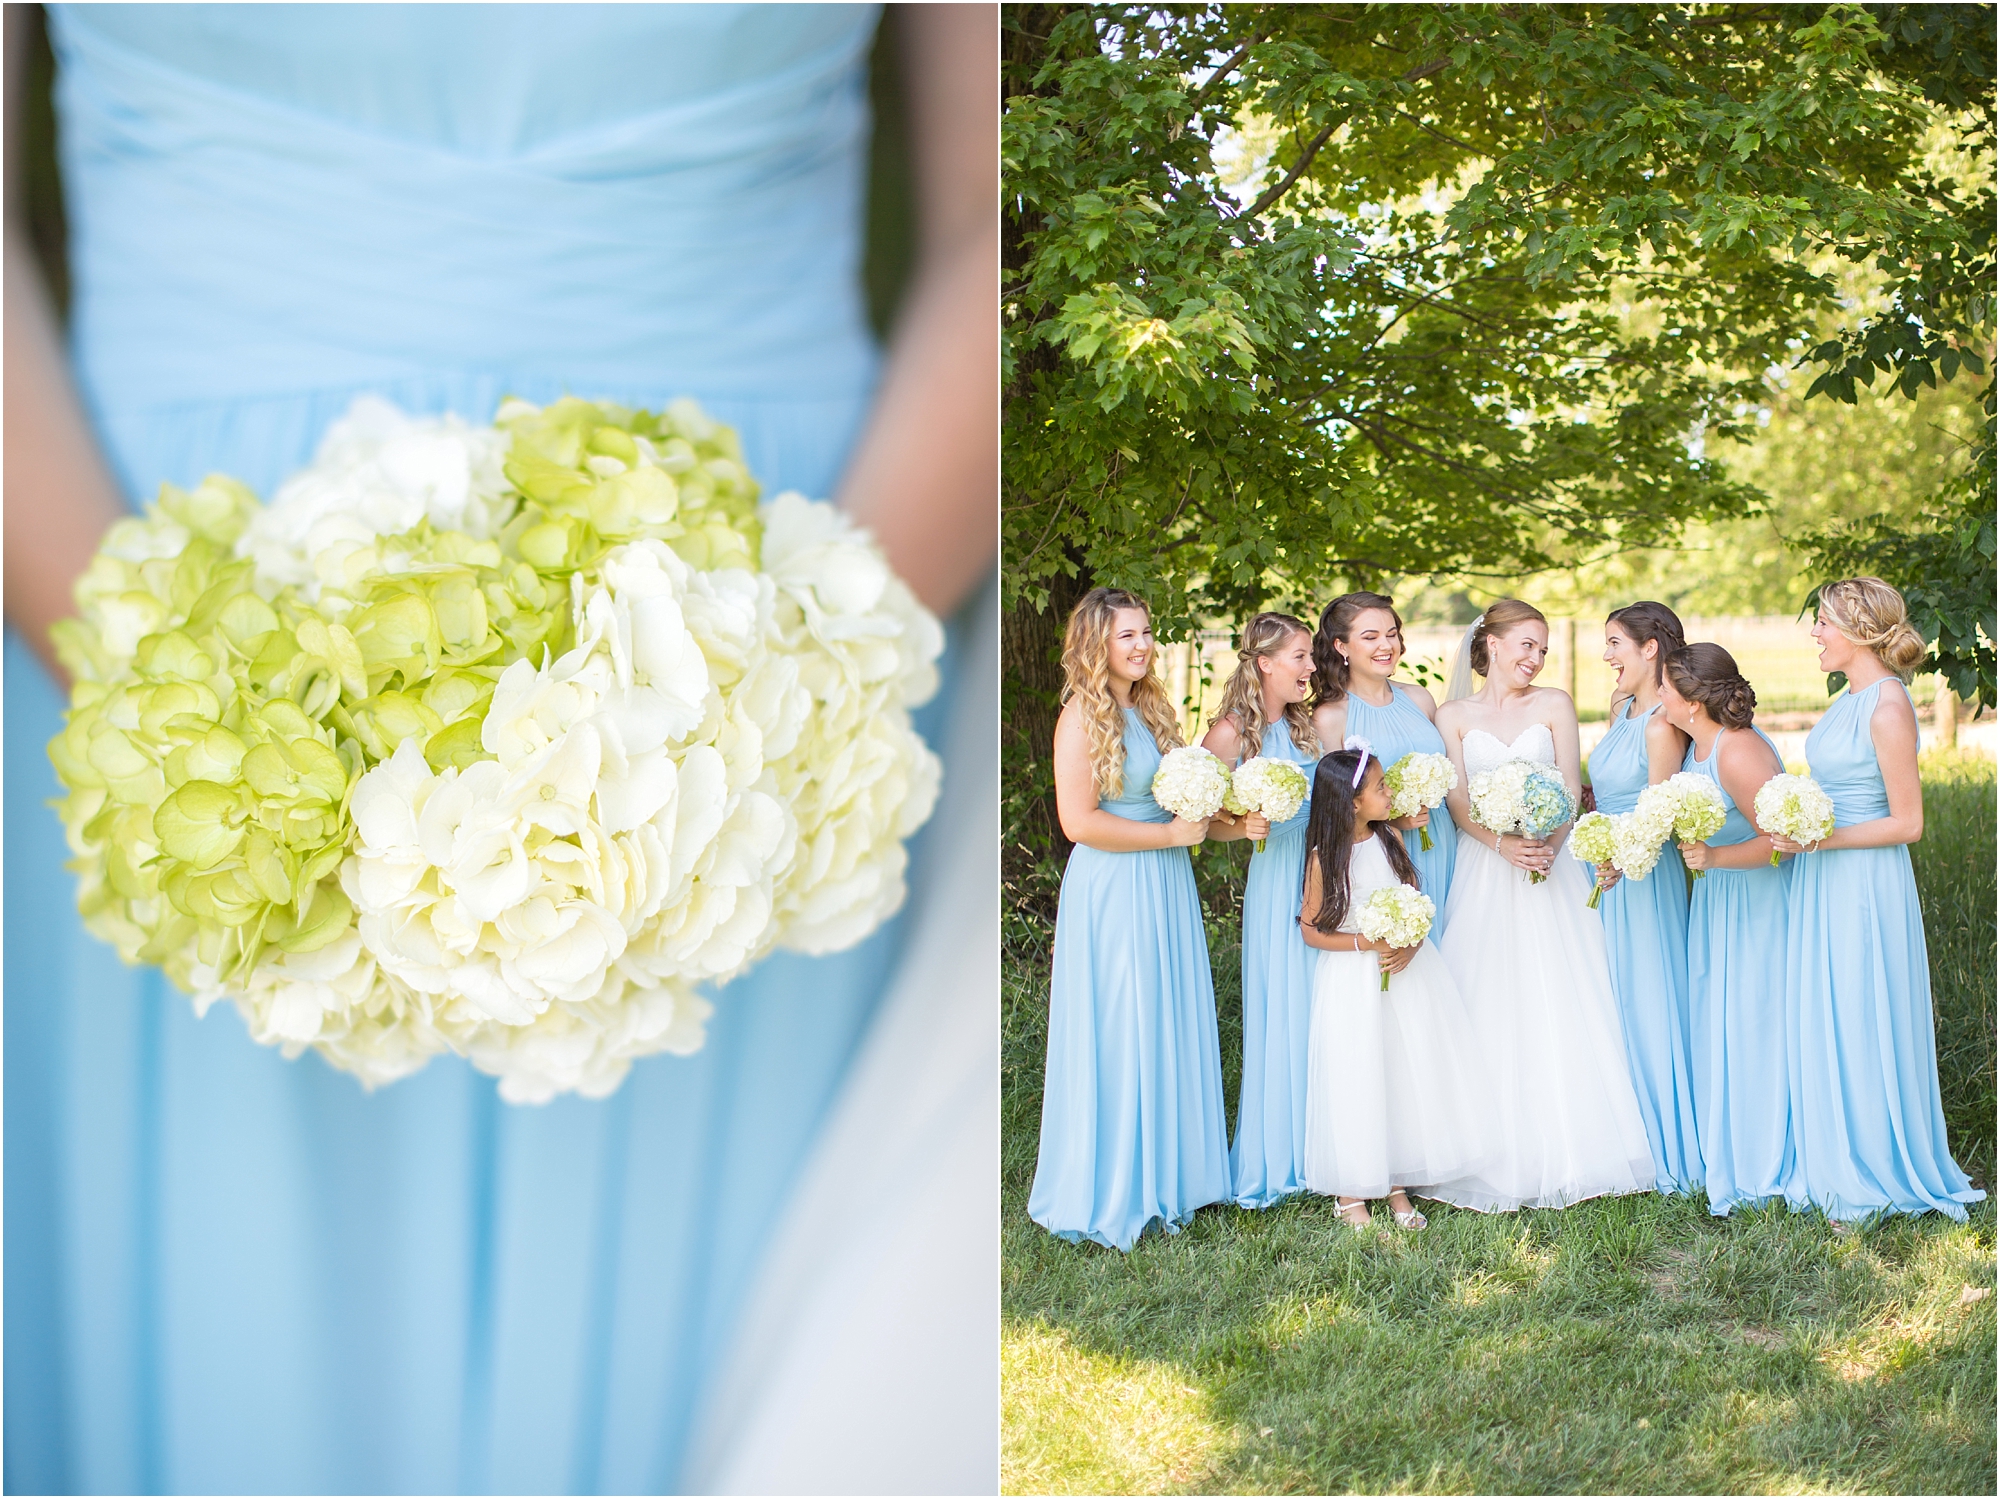 Mroz 2-Bridal Party-268_anna grace photography top of the bay maryland wedding photographer photo.jpg